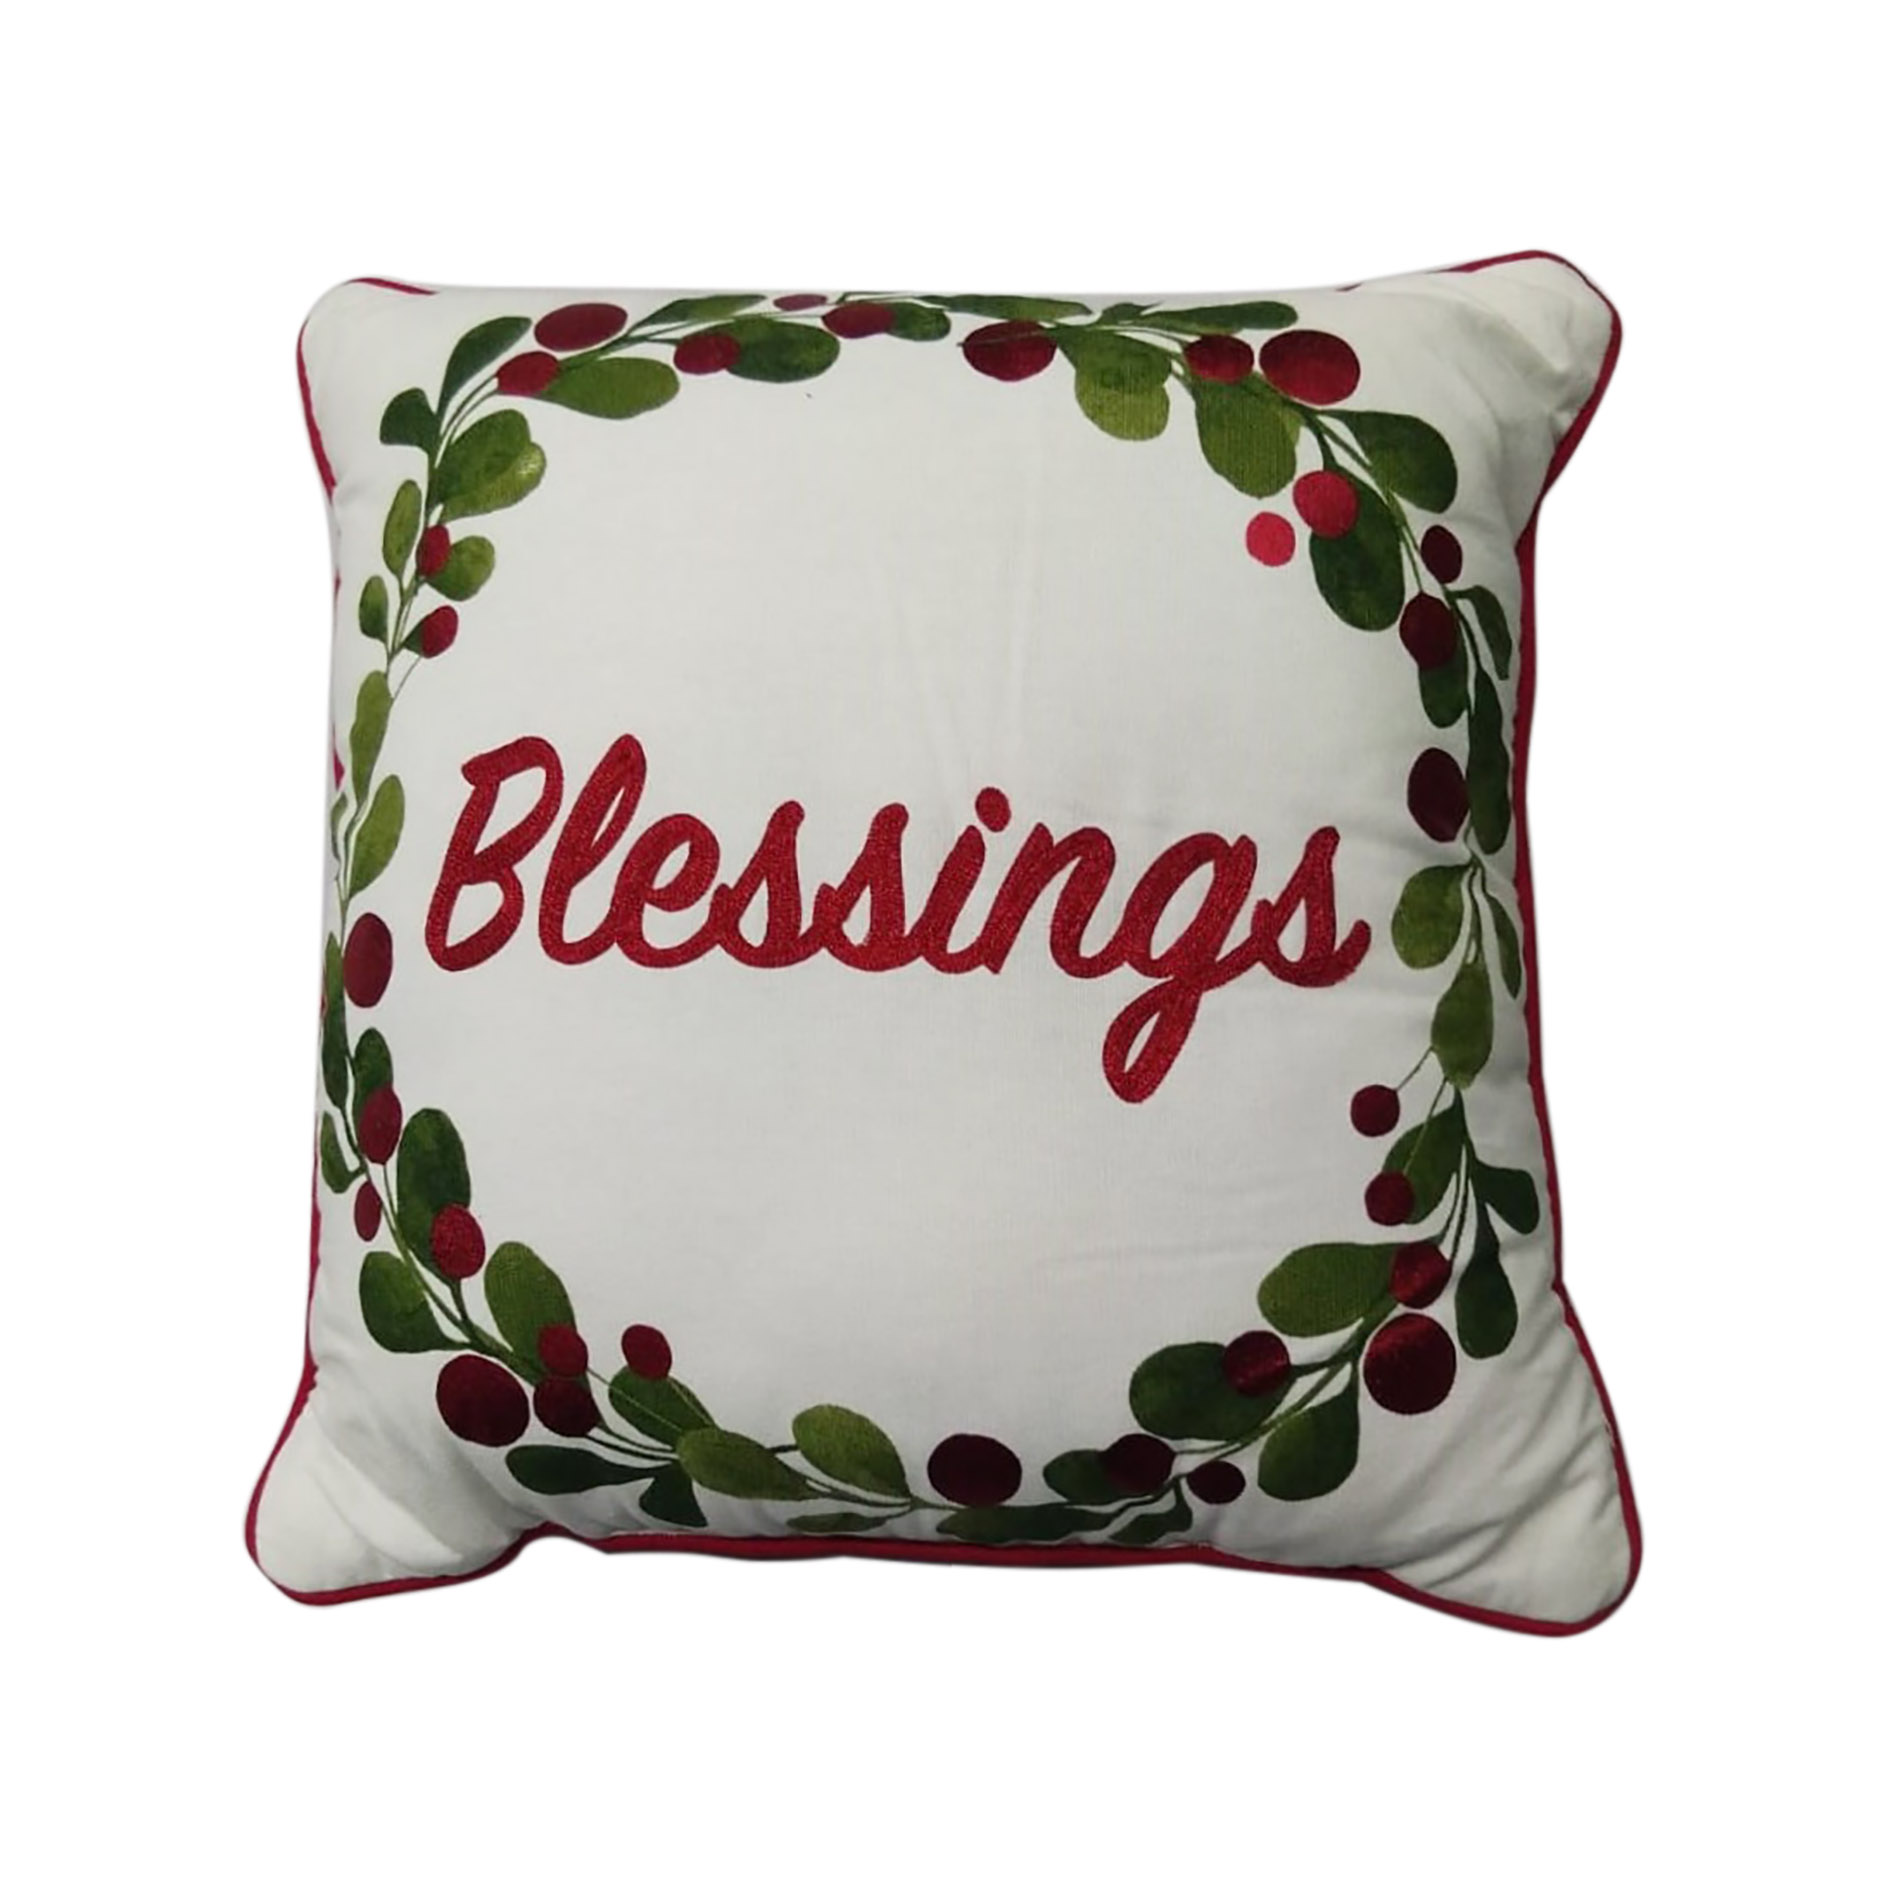 Blessings Decorative Pillow - 18" x 18"